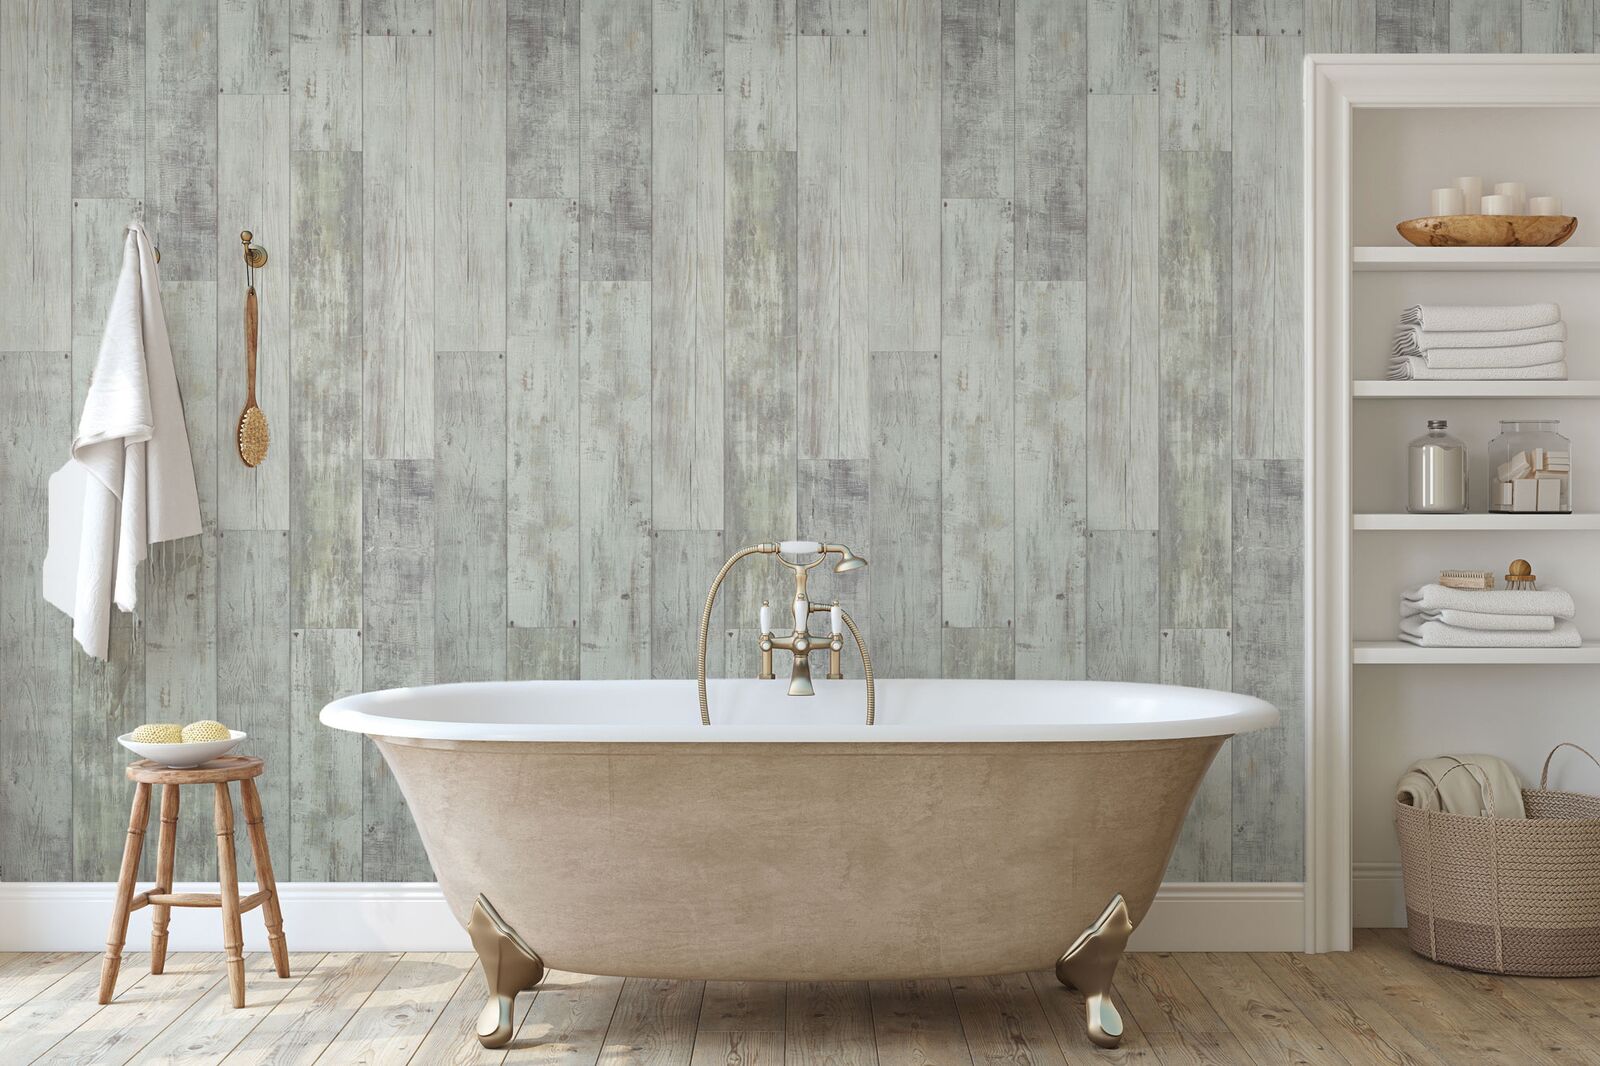 Bathtub in front of Rustic wood wall panel